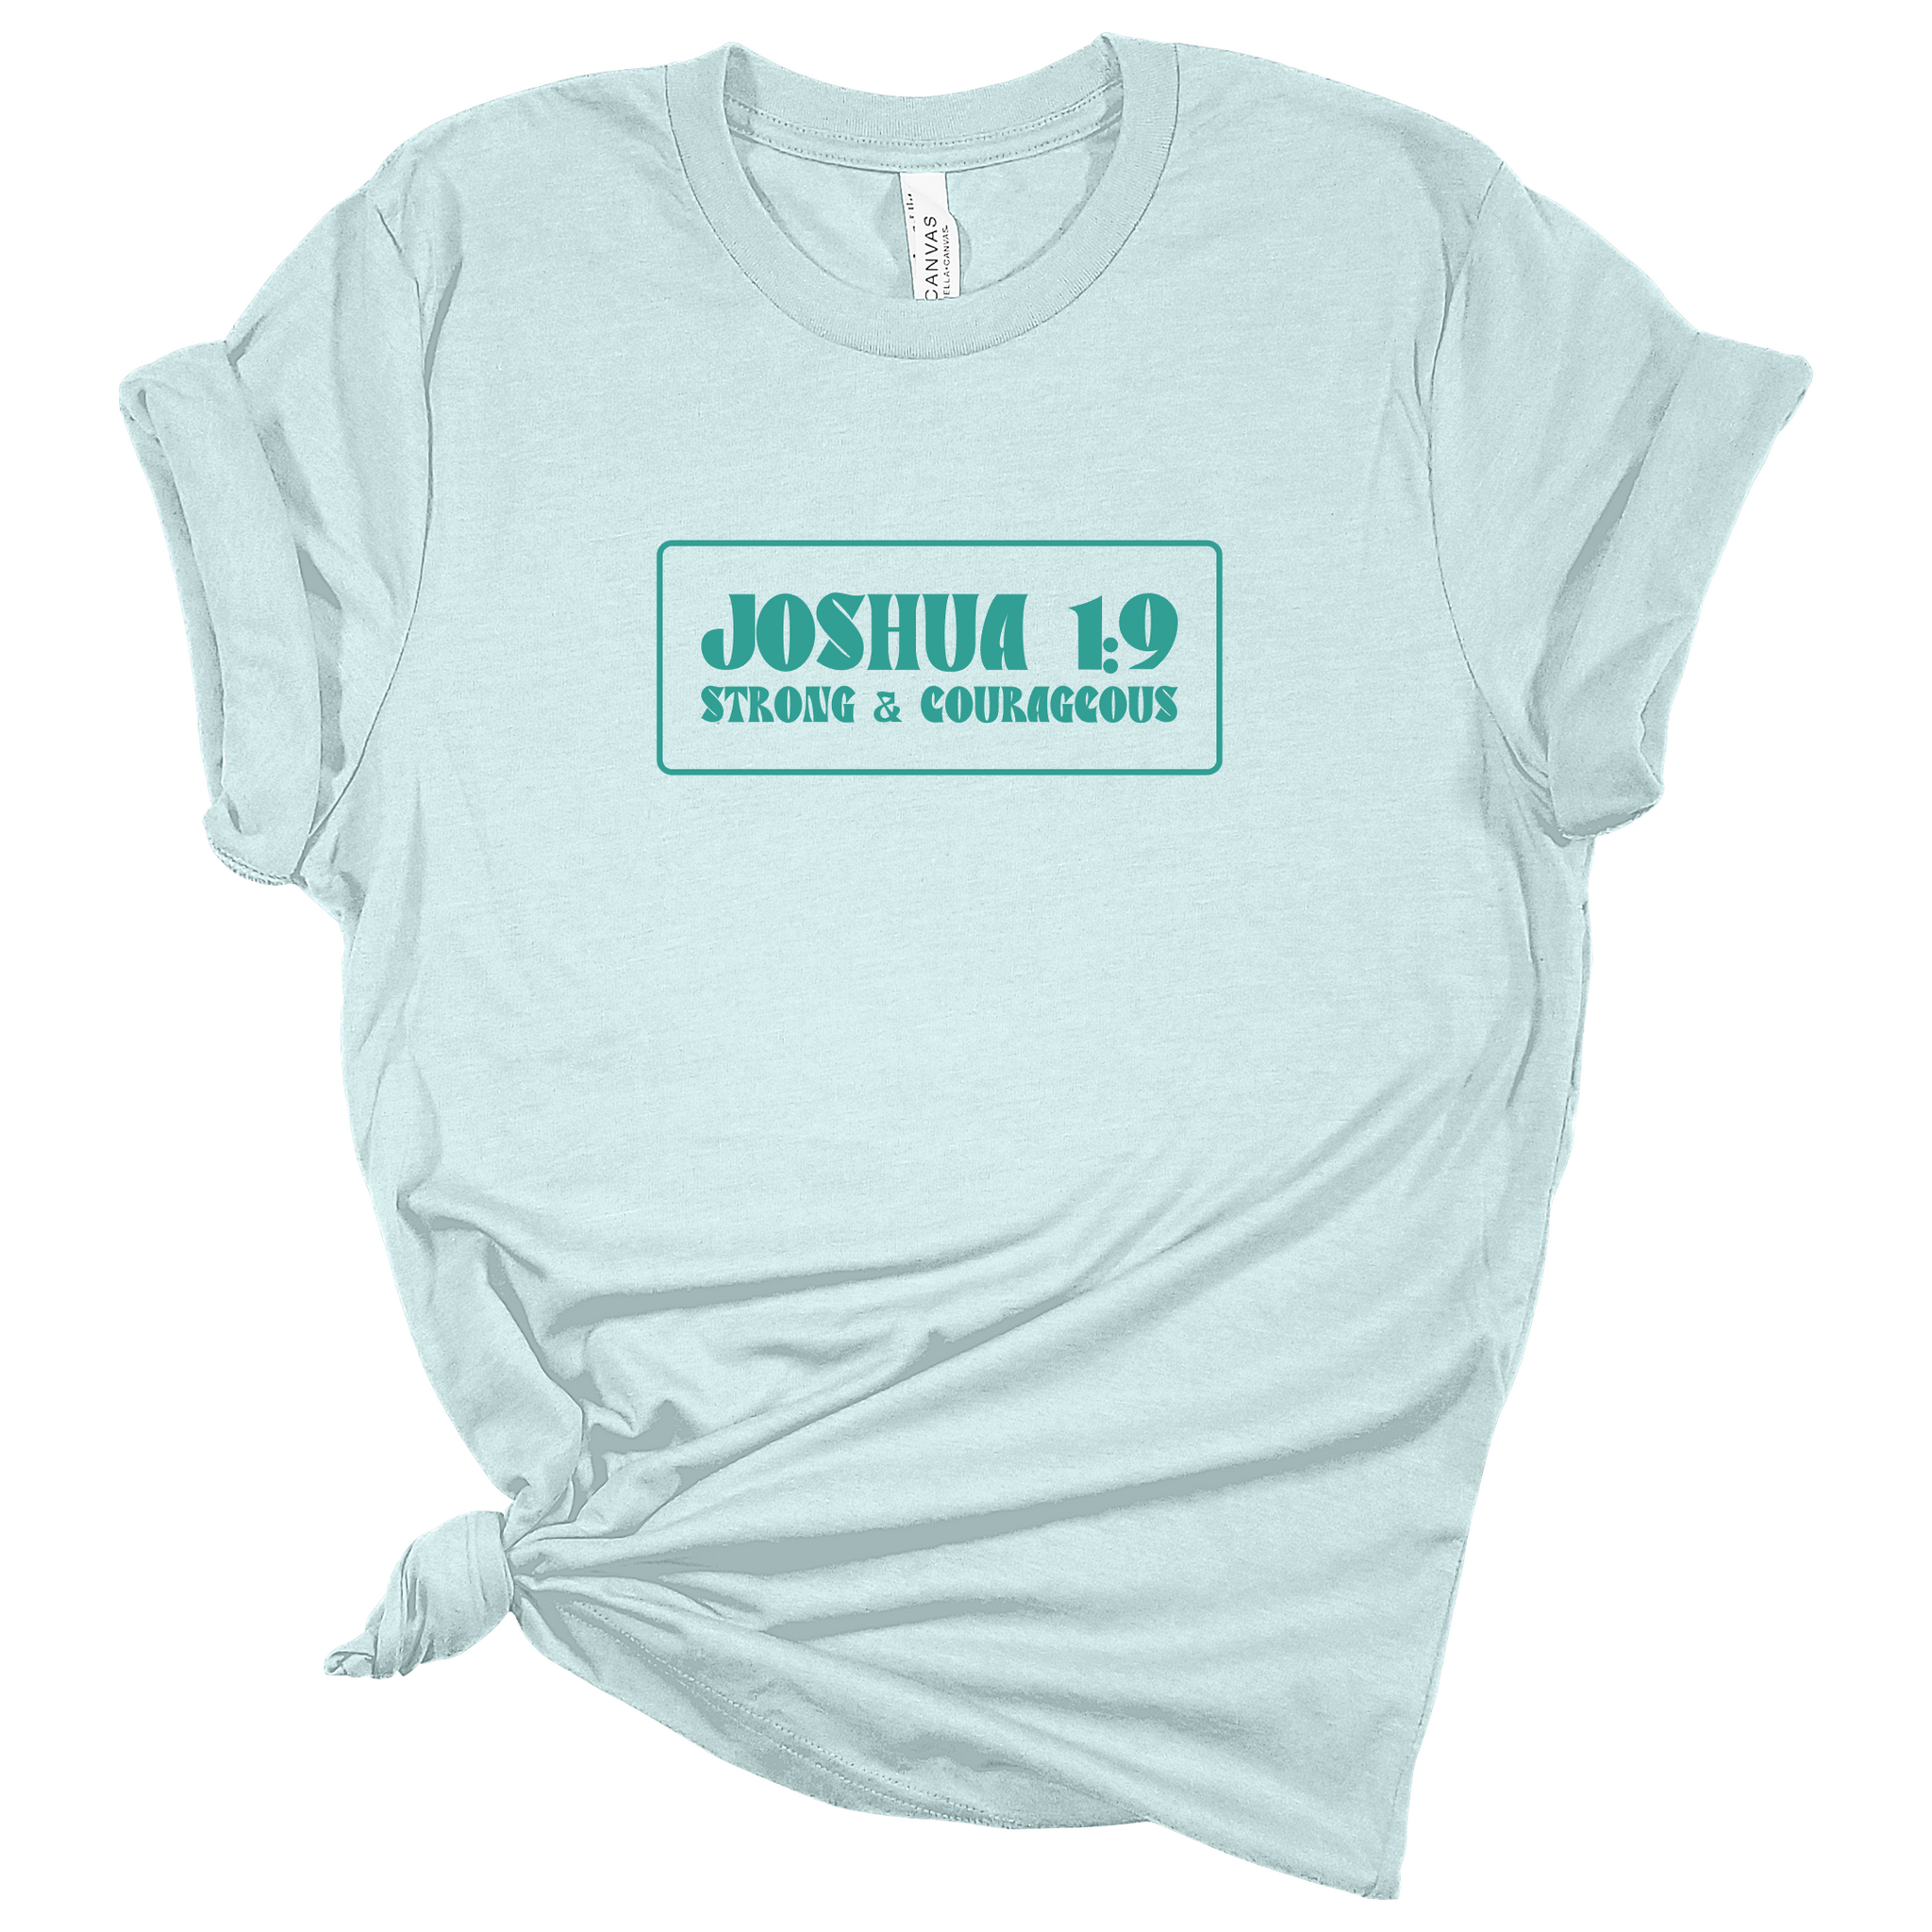 Joshua 1:9 Strong and Courageous Verse - Light Blue Tshirt - Adult & Women's Gym Top - S002